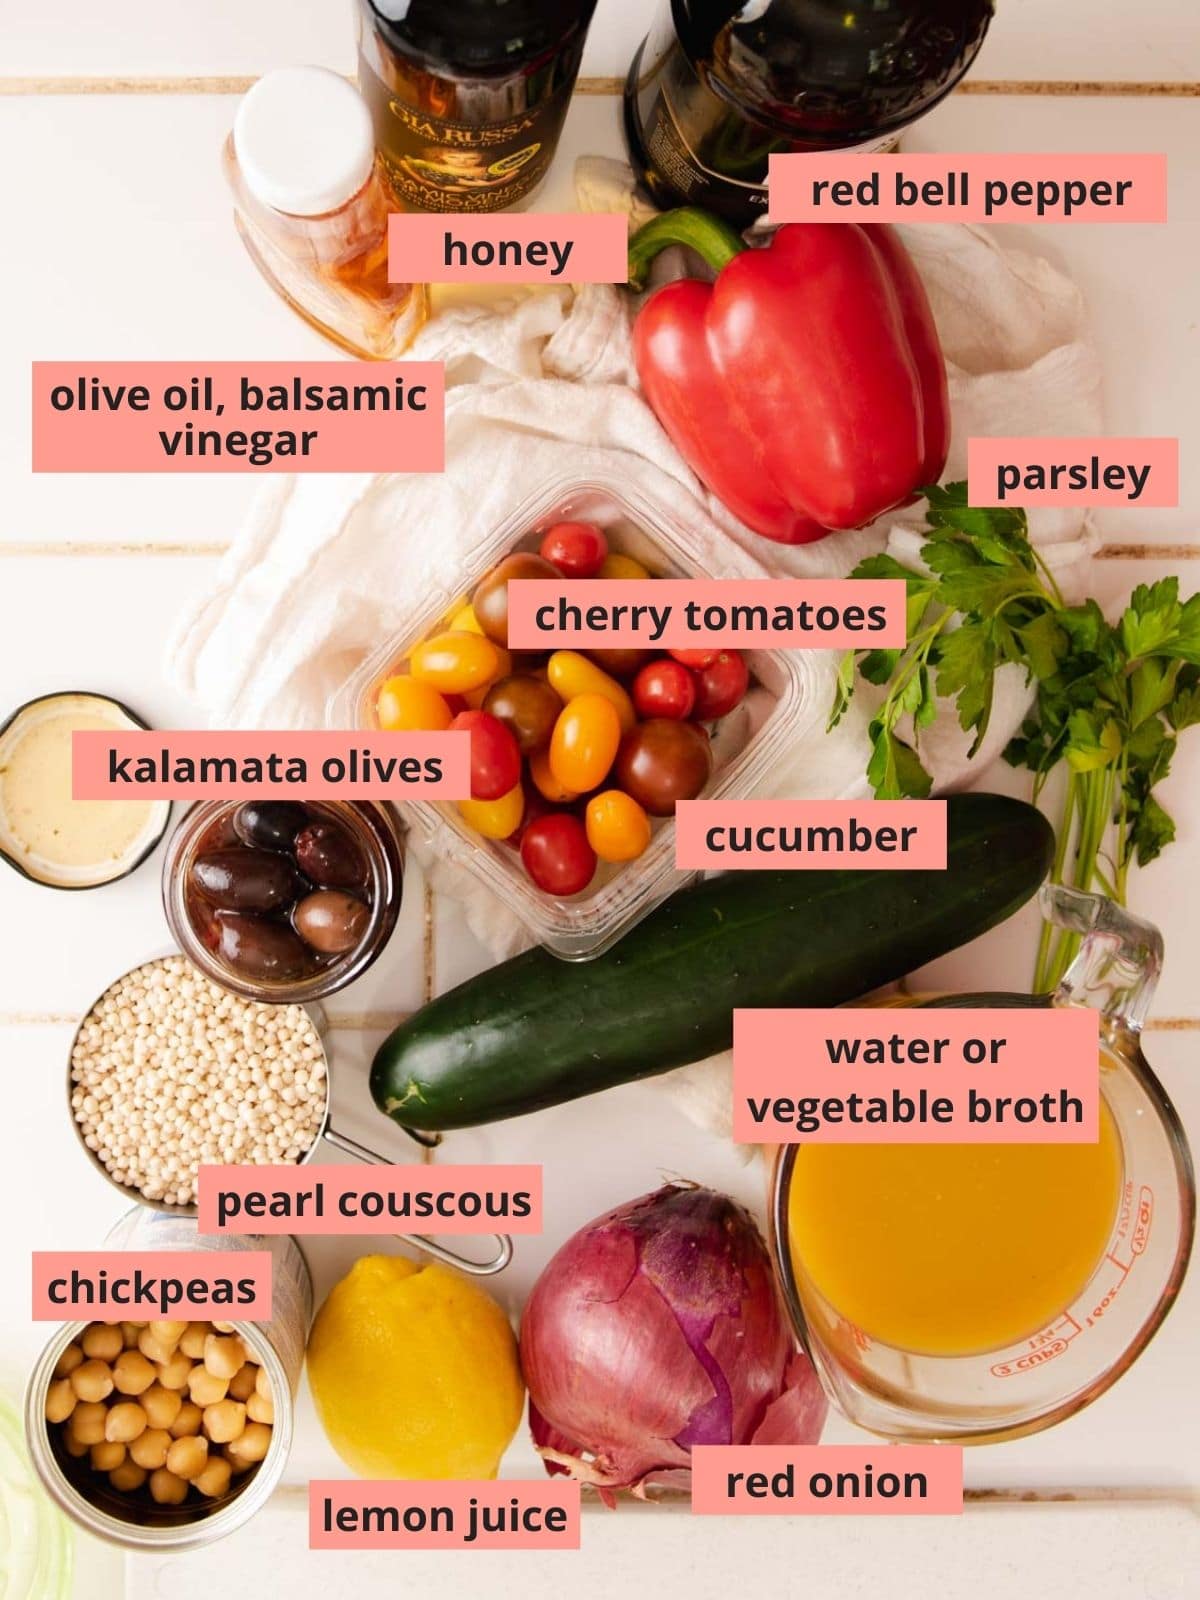 Labeled ingredients used to make couscous salad